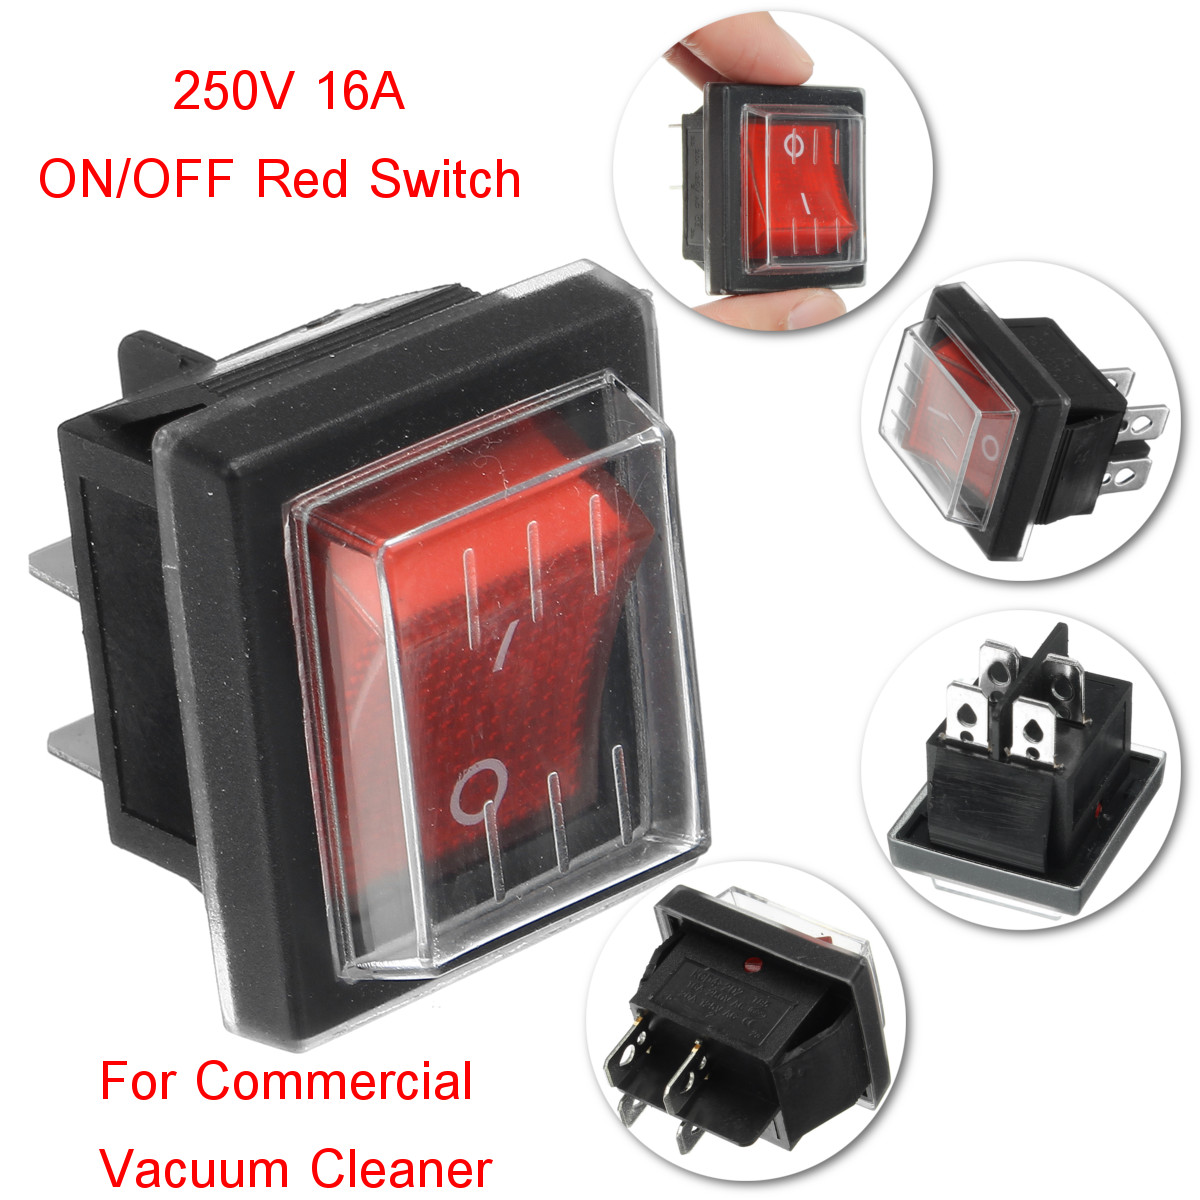 220V16A-20A-125V-ONOFF-Red-Switch-Spare-Waterproof-Switch-For-Industrial-Vacuum-Suction-Machines-1239637-1